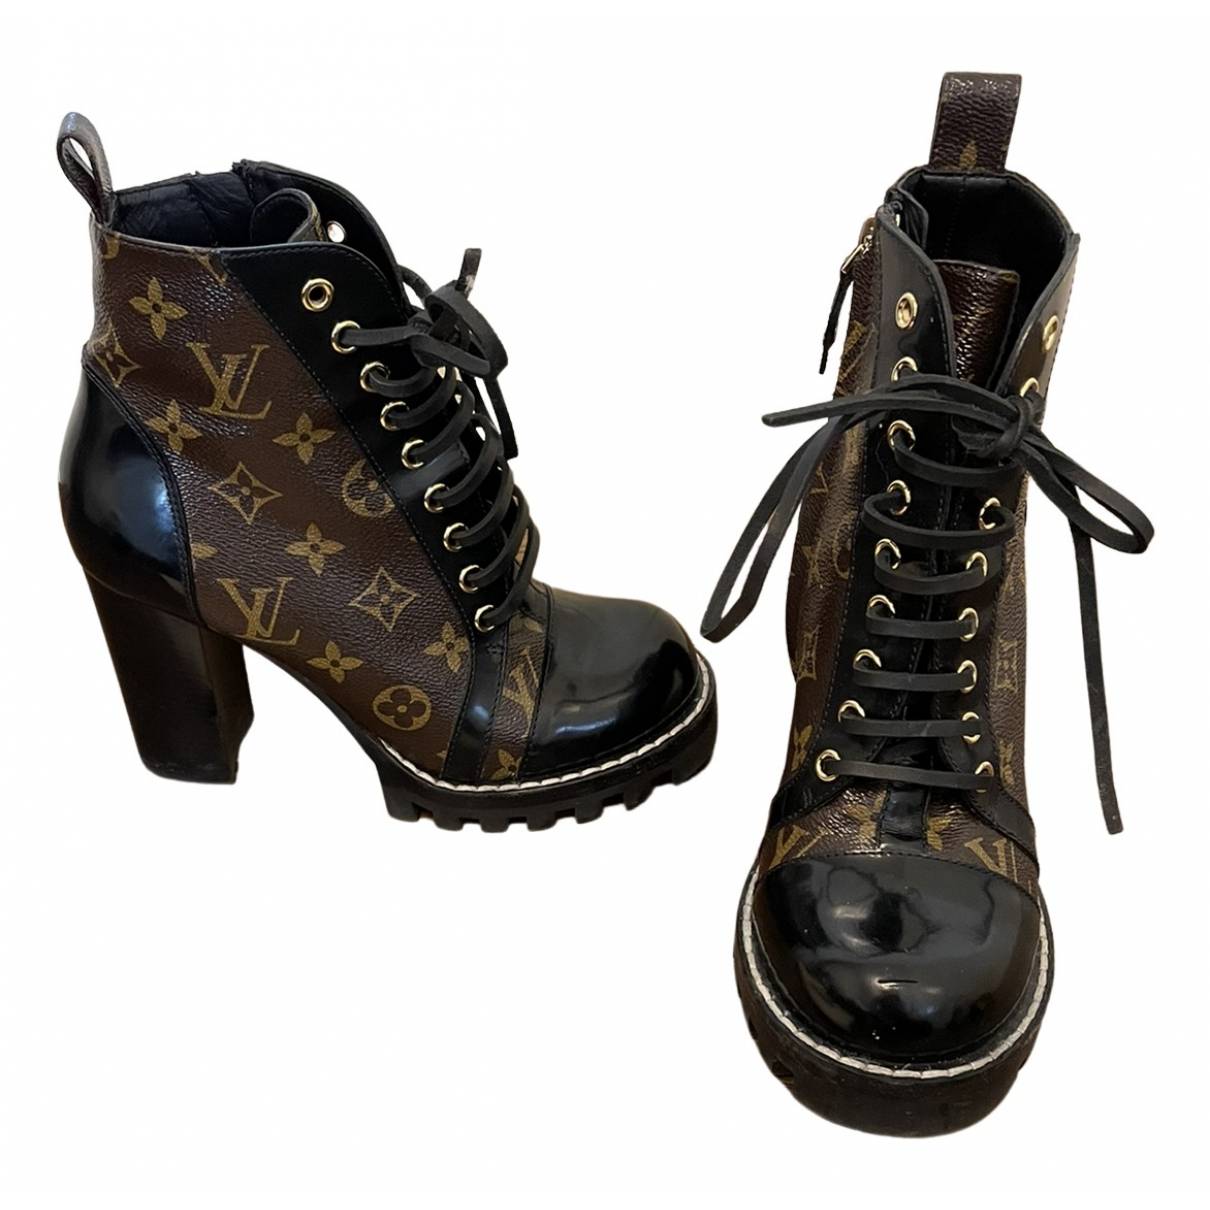 Star trail leather ankle boots Louis Vuitton Brown size 37 EU in Leather -  22129033